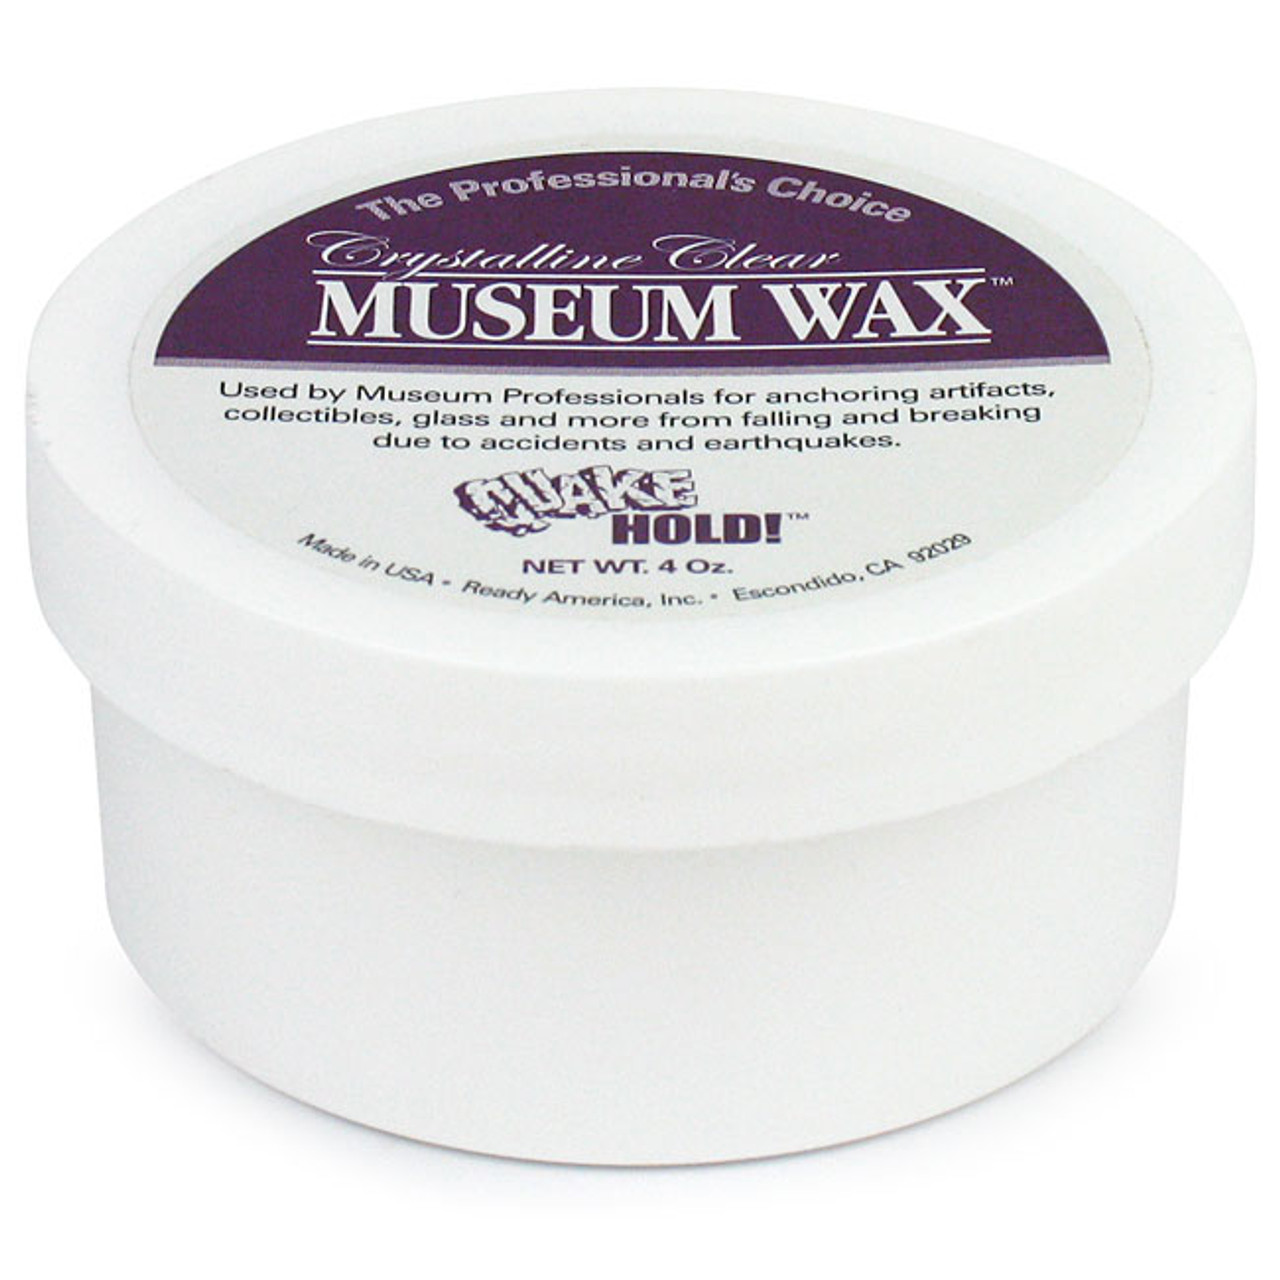 QuakeHOLD! Museum Putty 2.64oz REMOVEABLE Earthquake Survival Kit Wax FREE  SHIP 